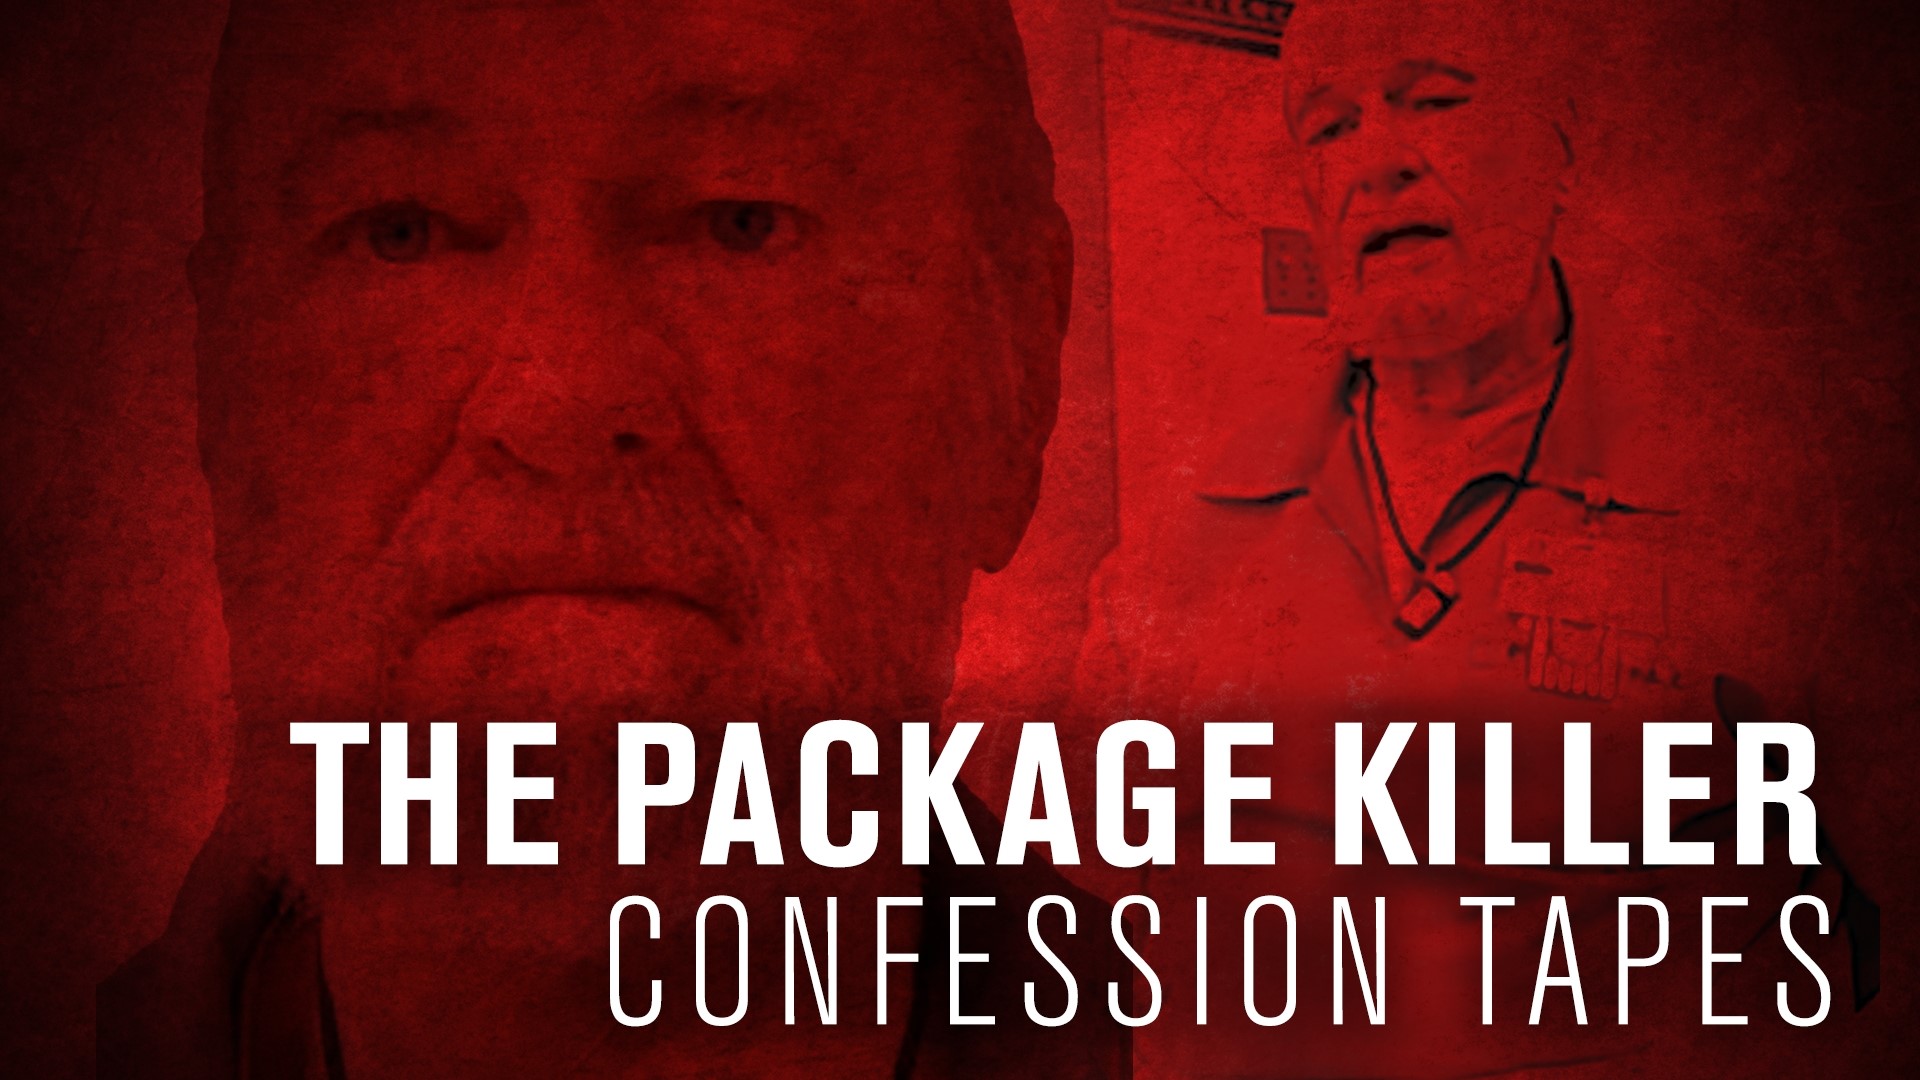 The so-called Package Killer goes from defensive to repentant during nine hours of confessions recorded during four visits with detectives in 2022.